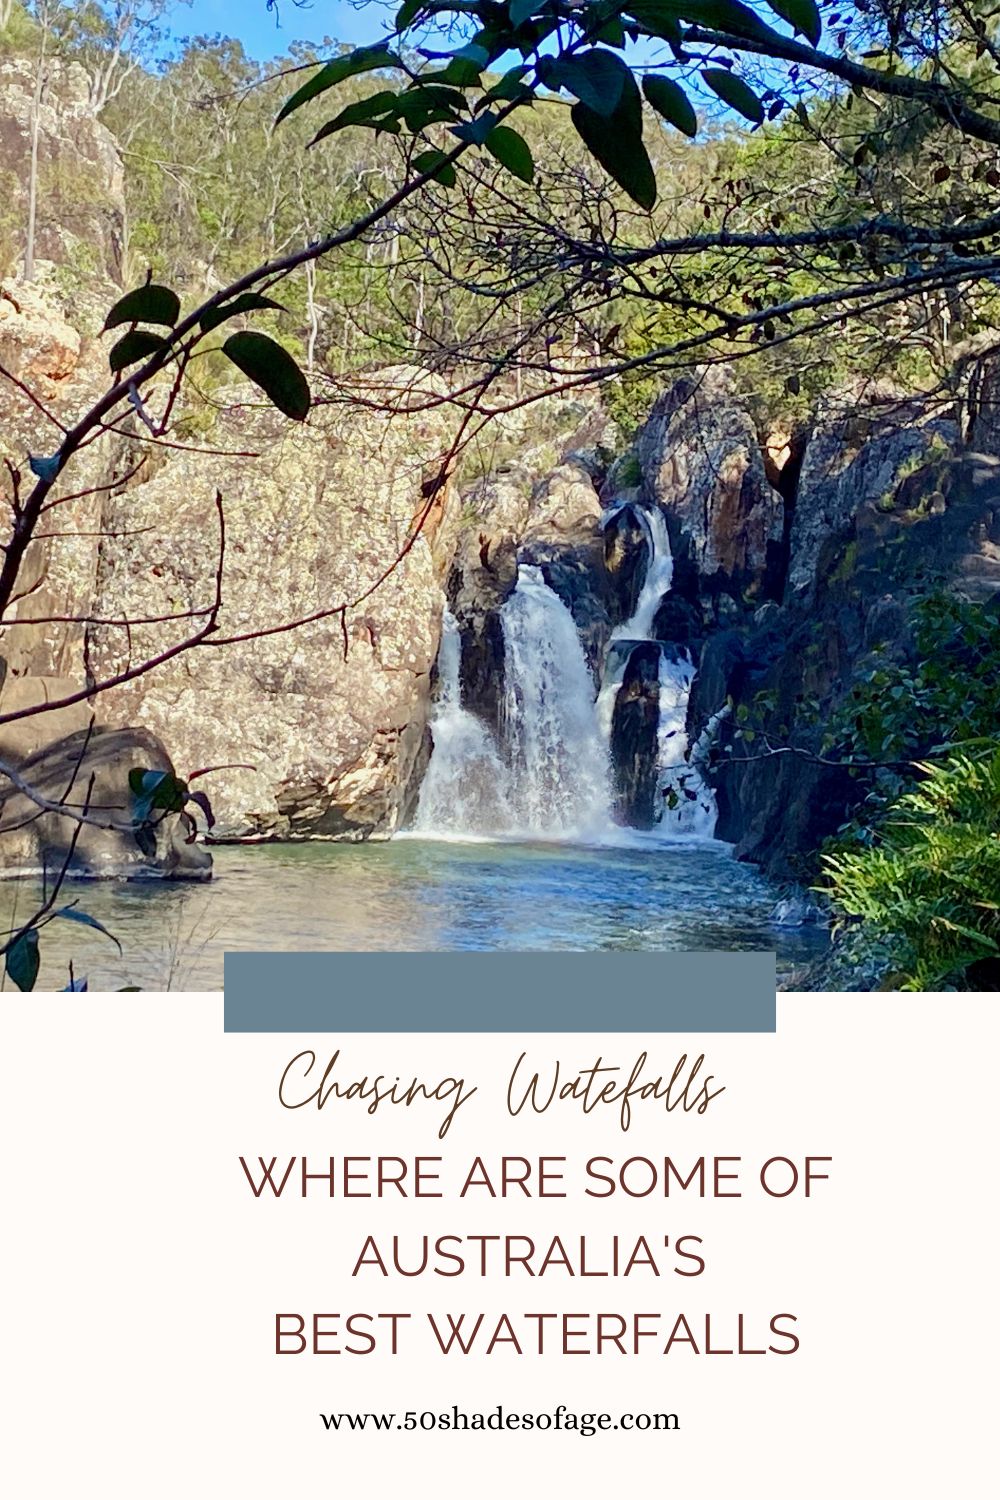 Where are Some of Australia’s Best Waterfalls?